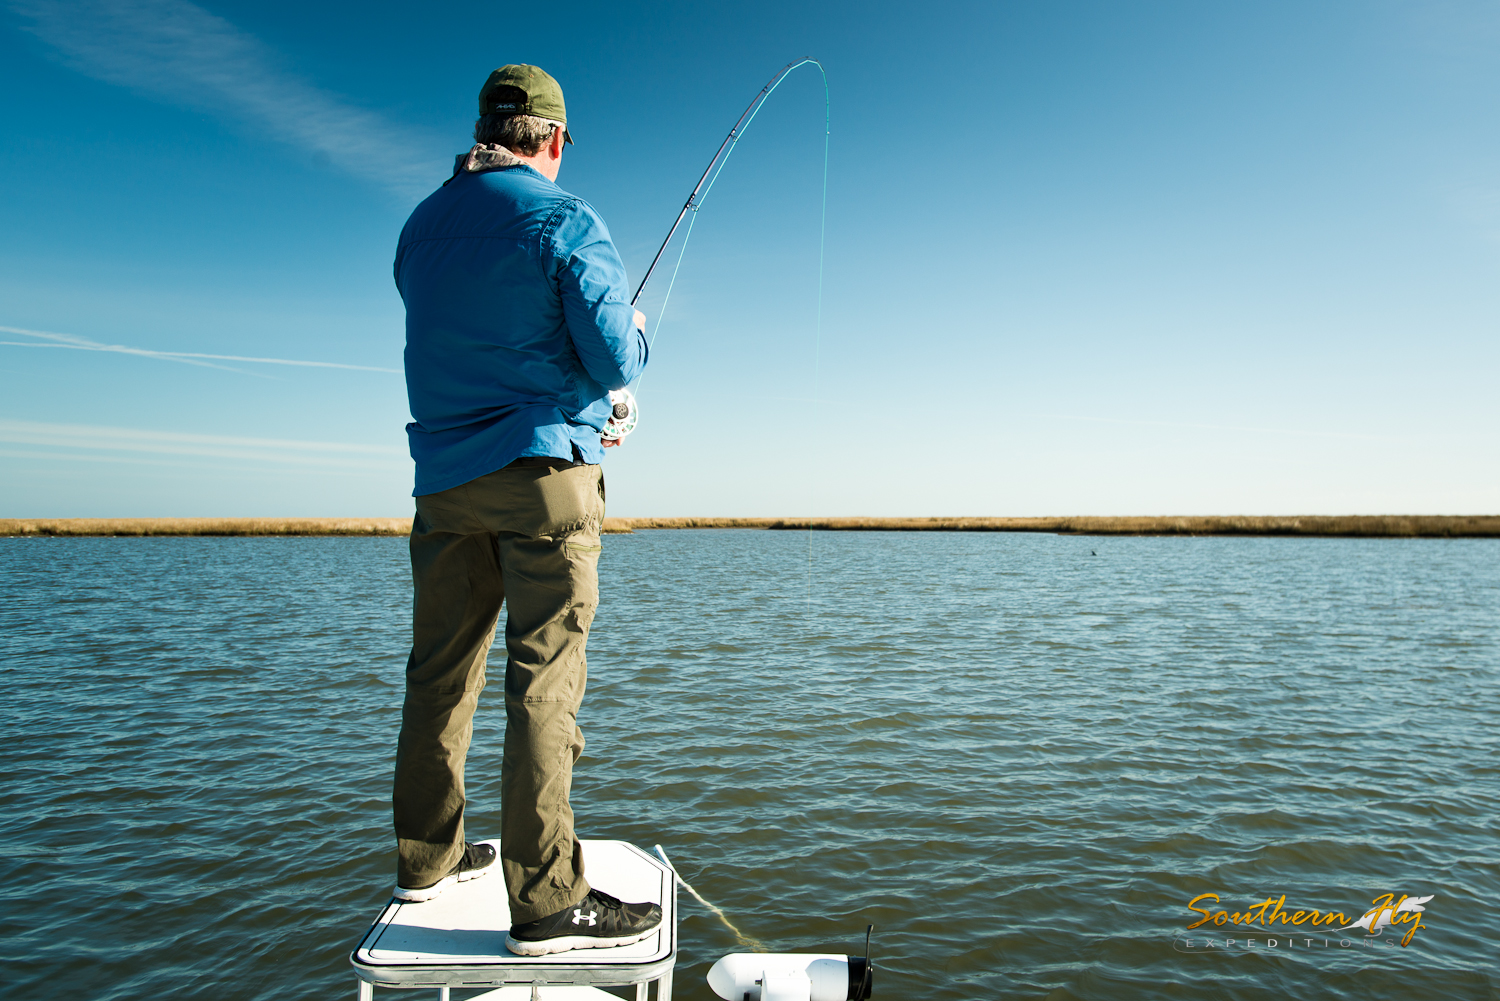 Redfish Sport Fly Fishing Trips New Orleans Southern Fly Expeditions